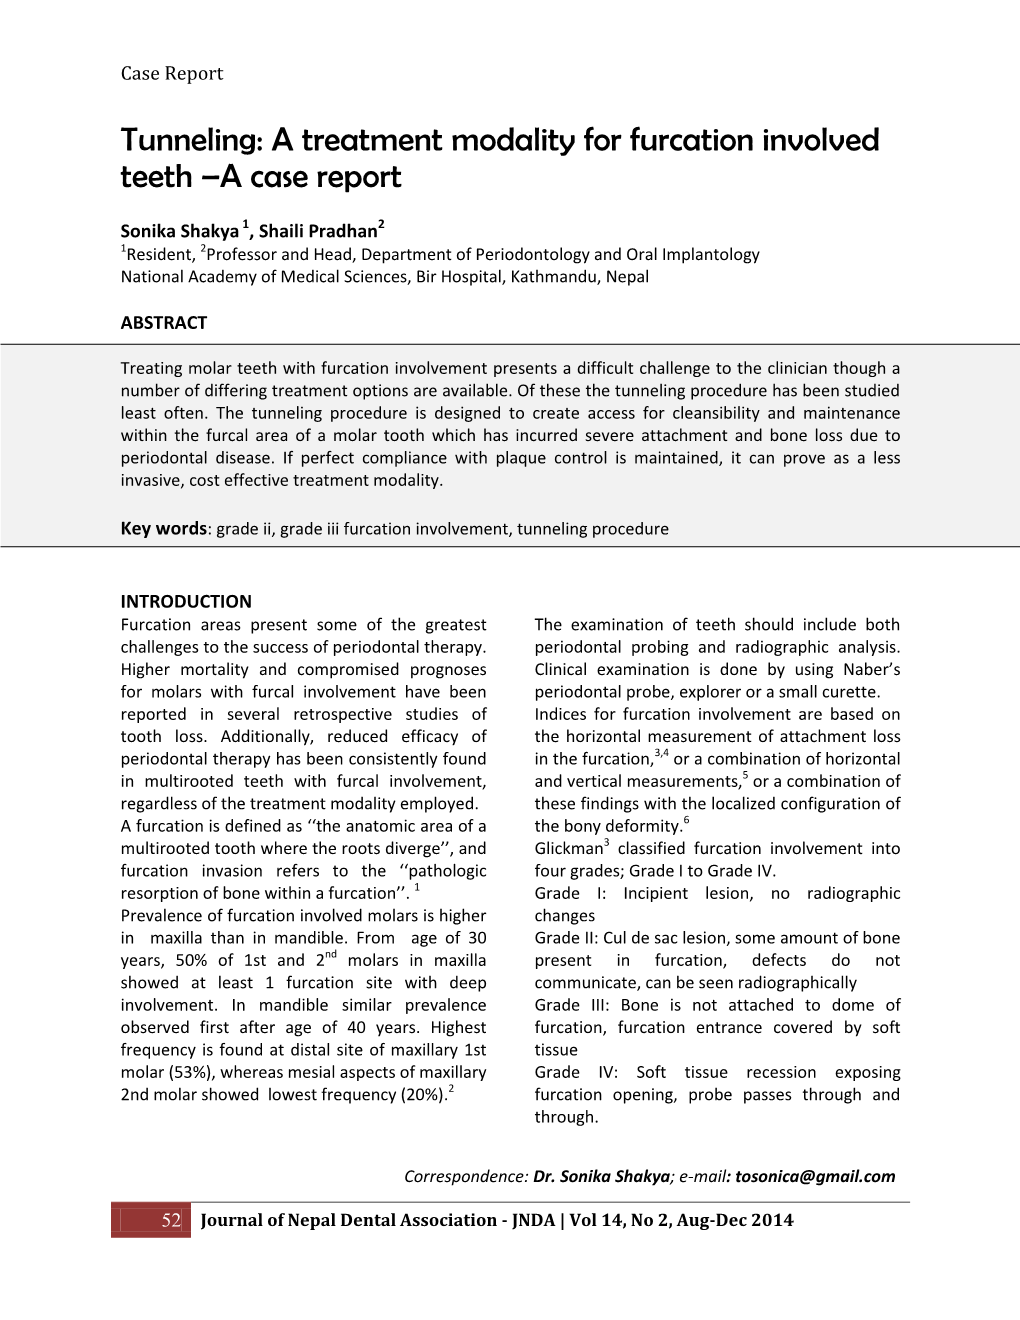 Tunneling: a Treatment Modality for Furcation Involved Teeth –A Case Report